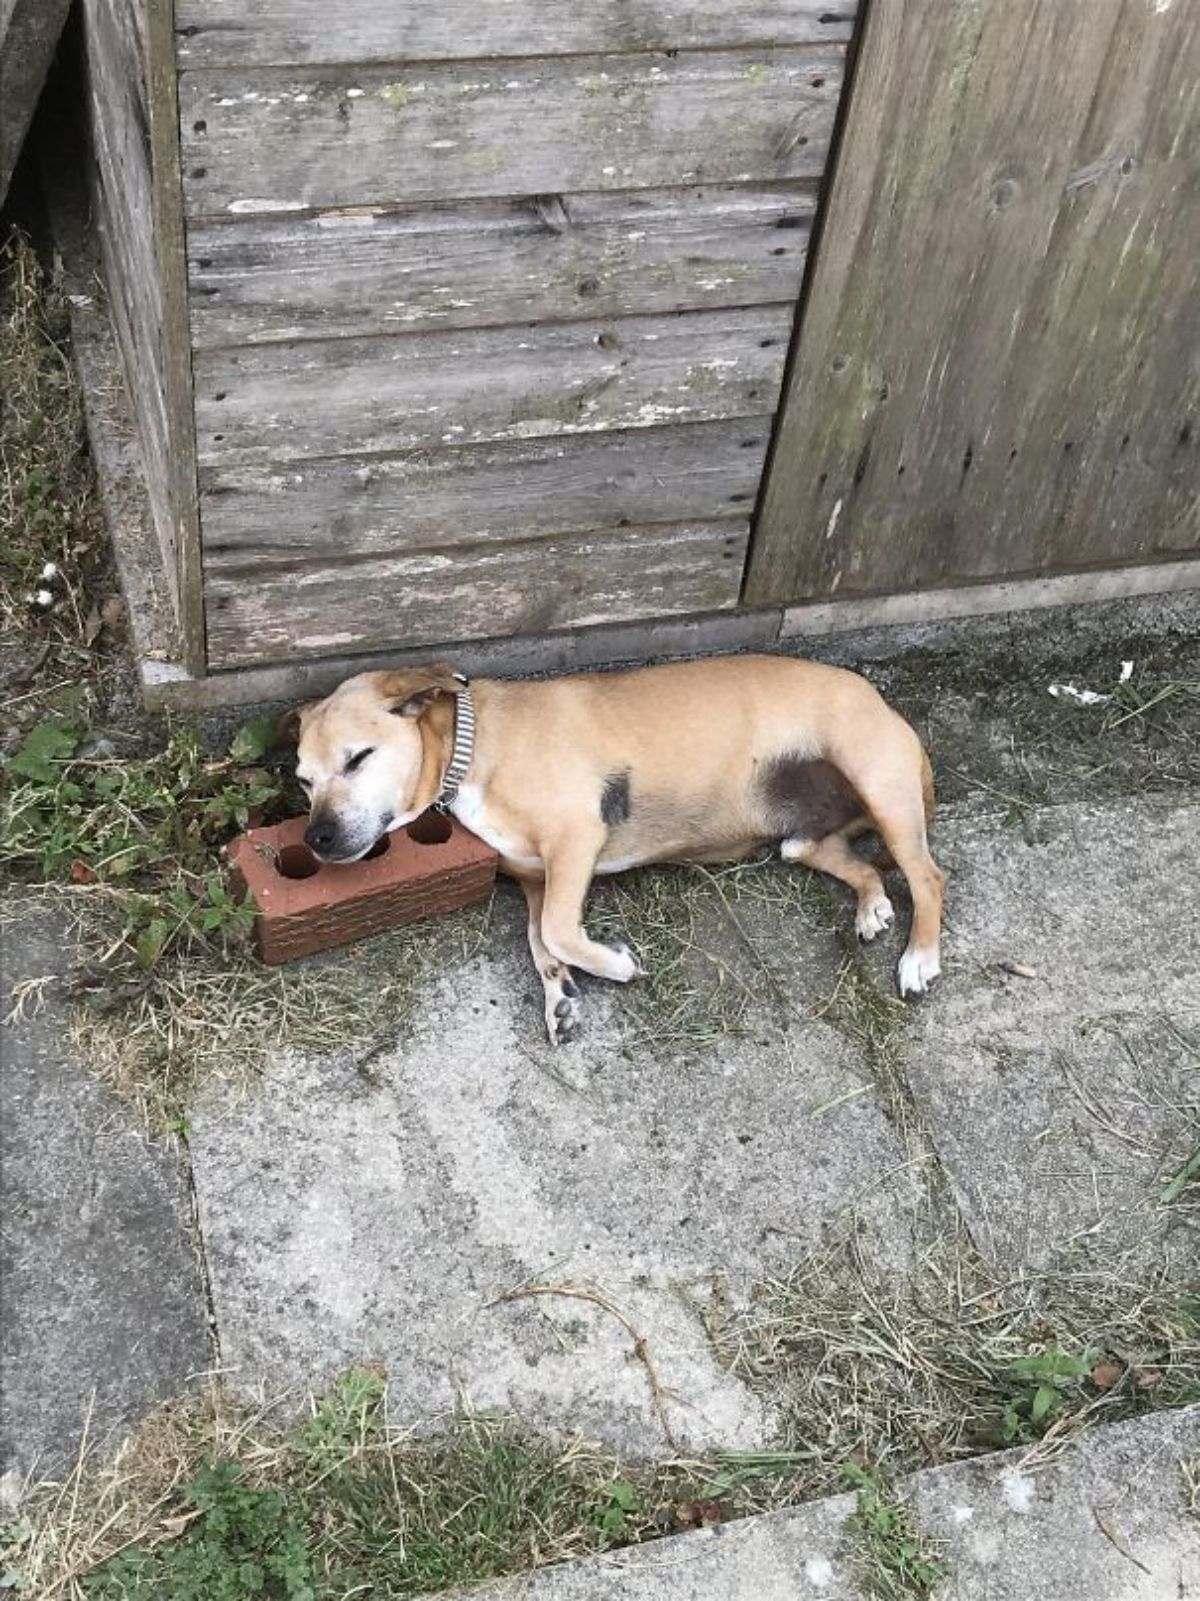 brown black and white dog sleeping outside a wooden shed sleeping sideways with the head on a red brick